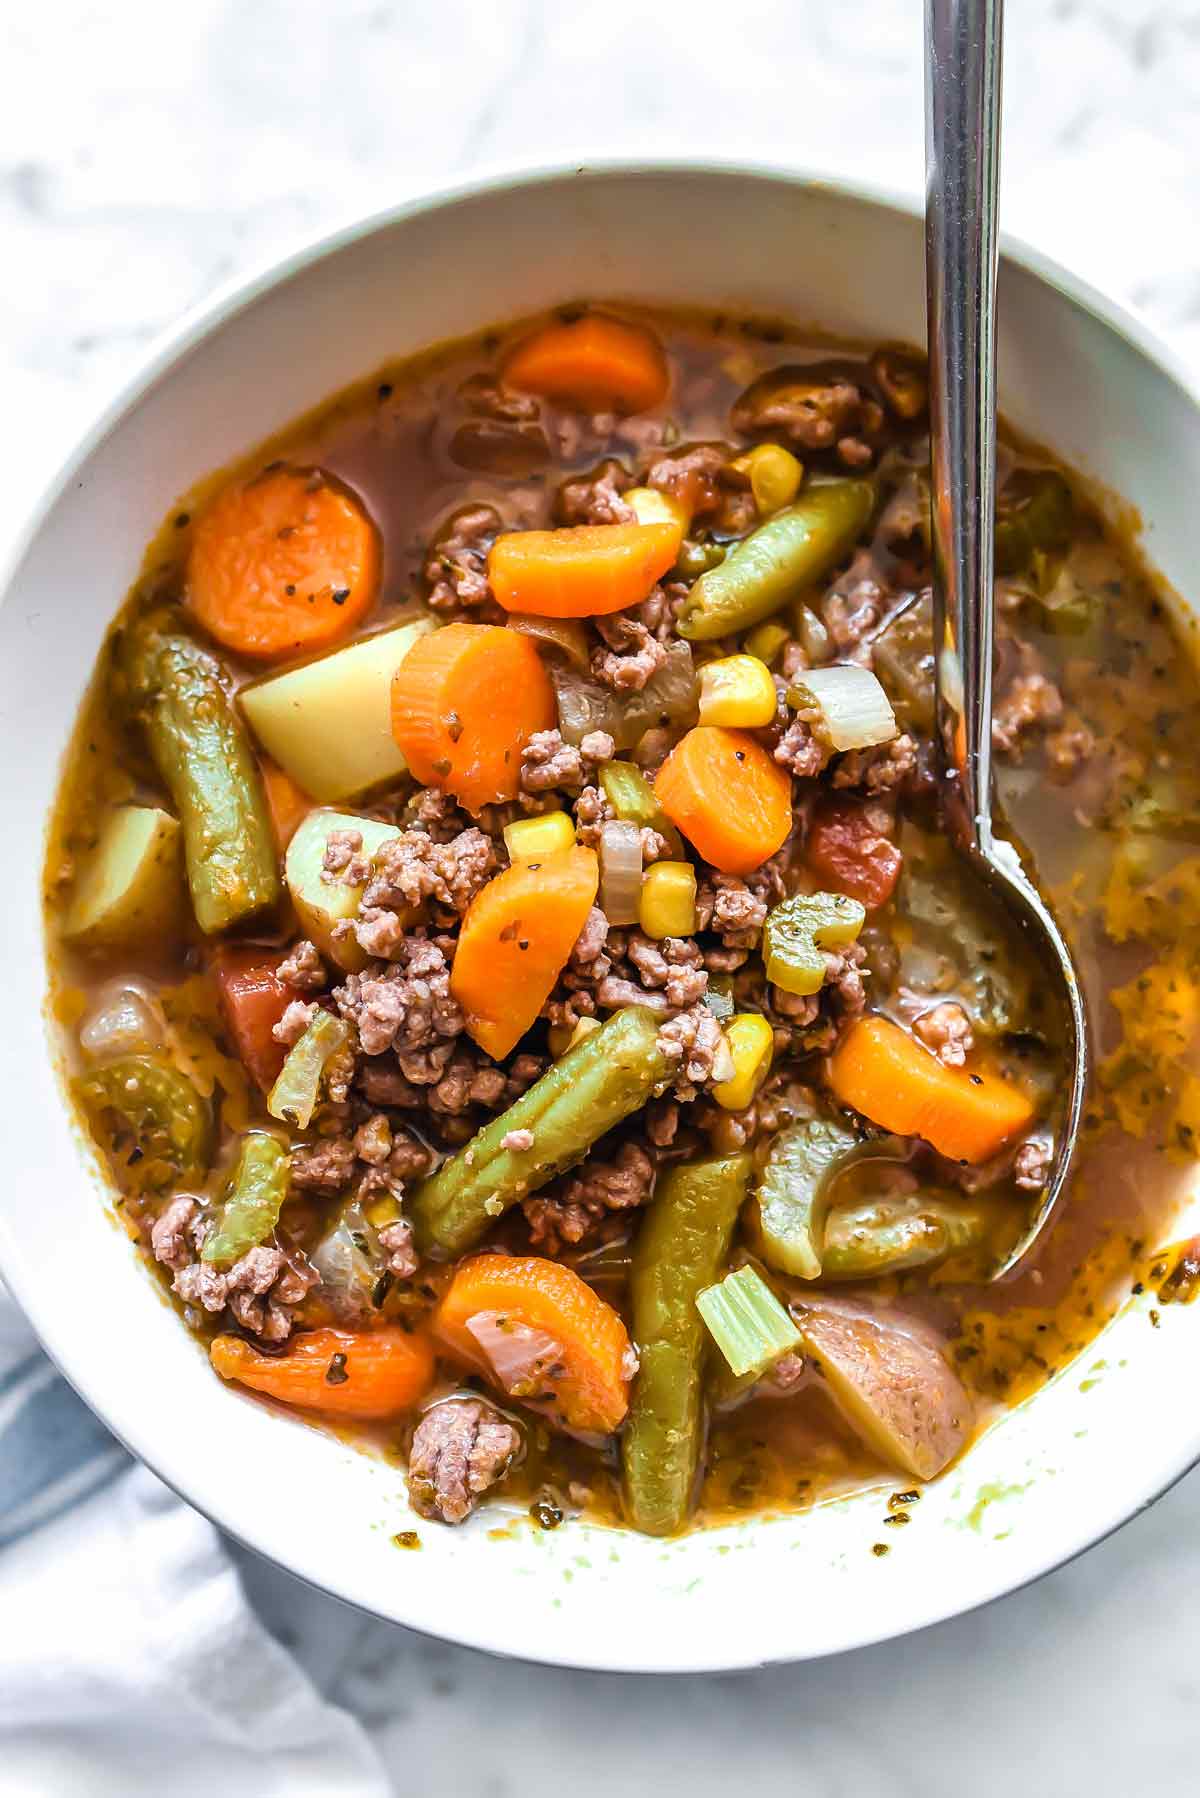 Easy Hamburger Soup with Vegetables | foodiecrush.com